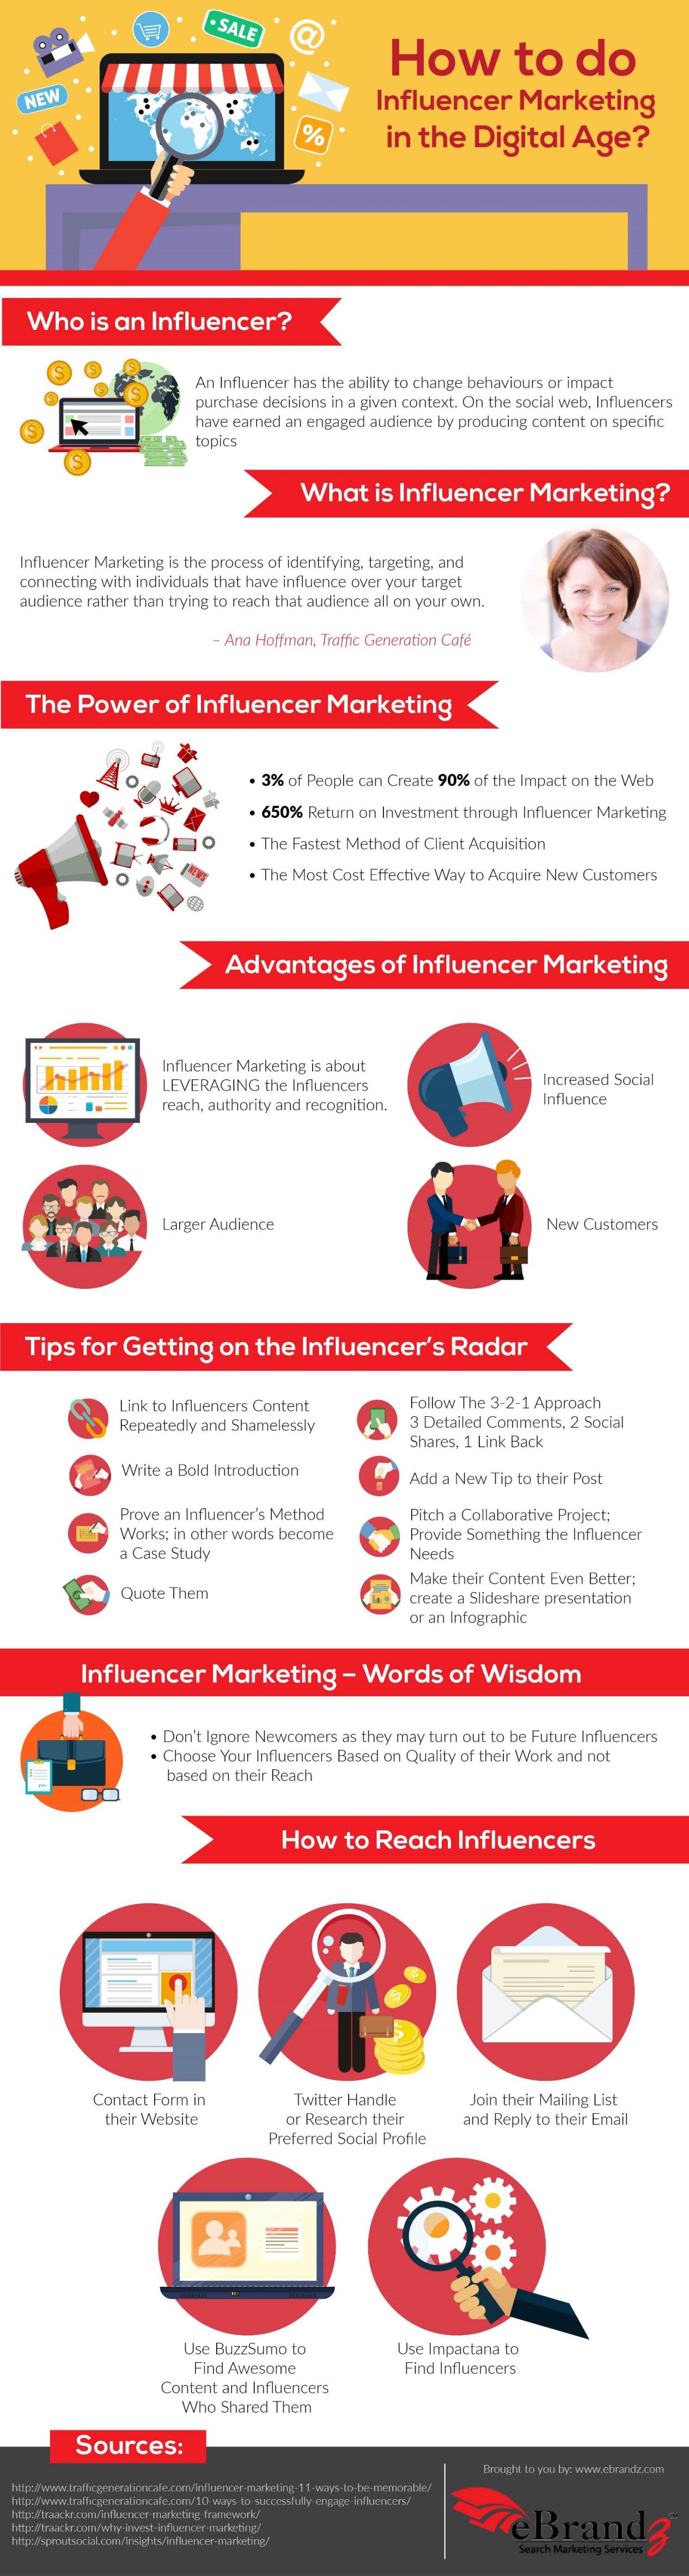 Influencer Marketing in the Digital Age